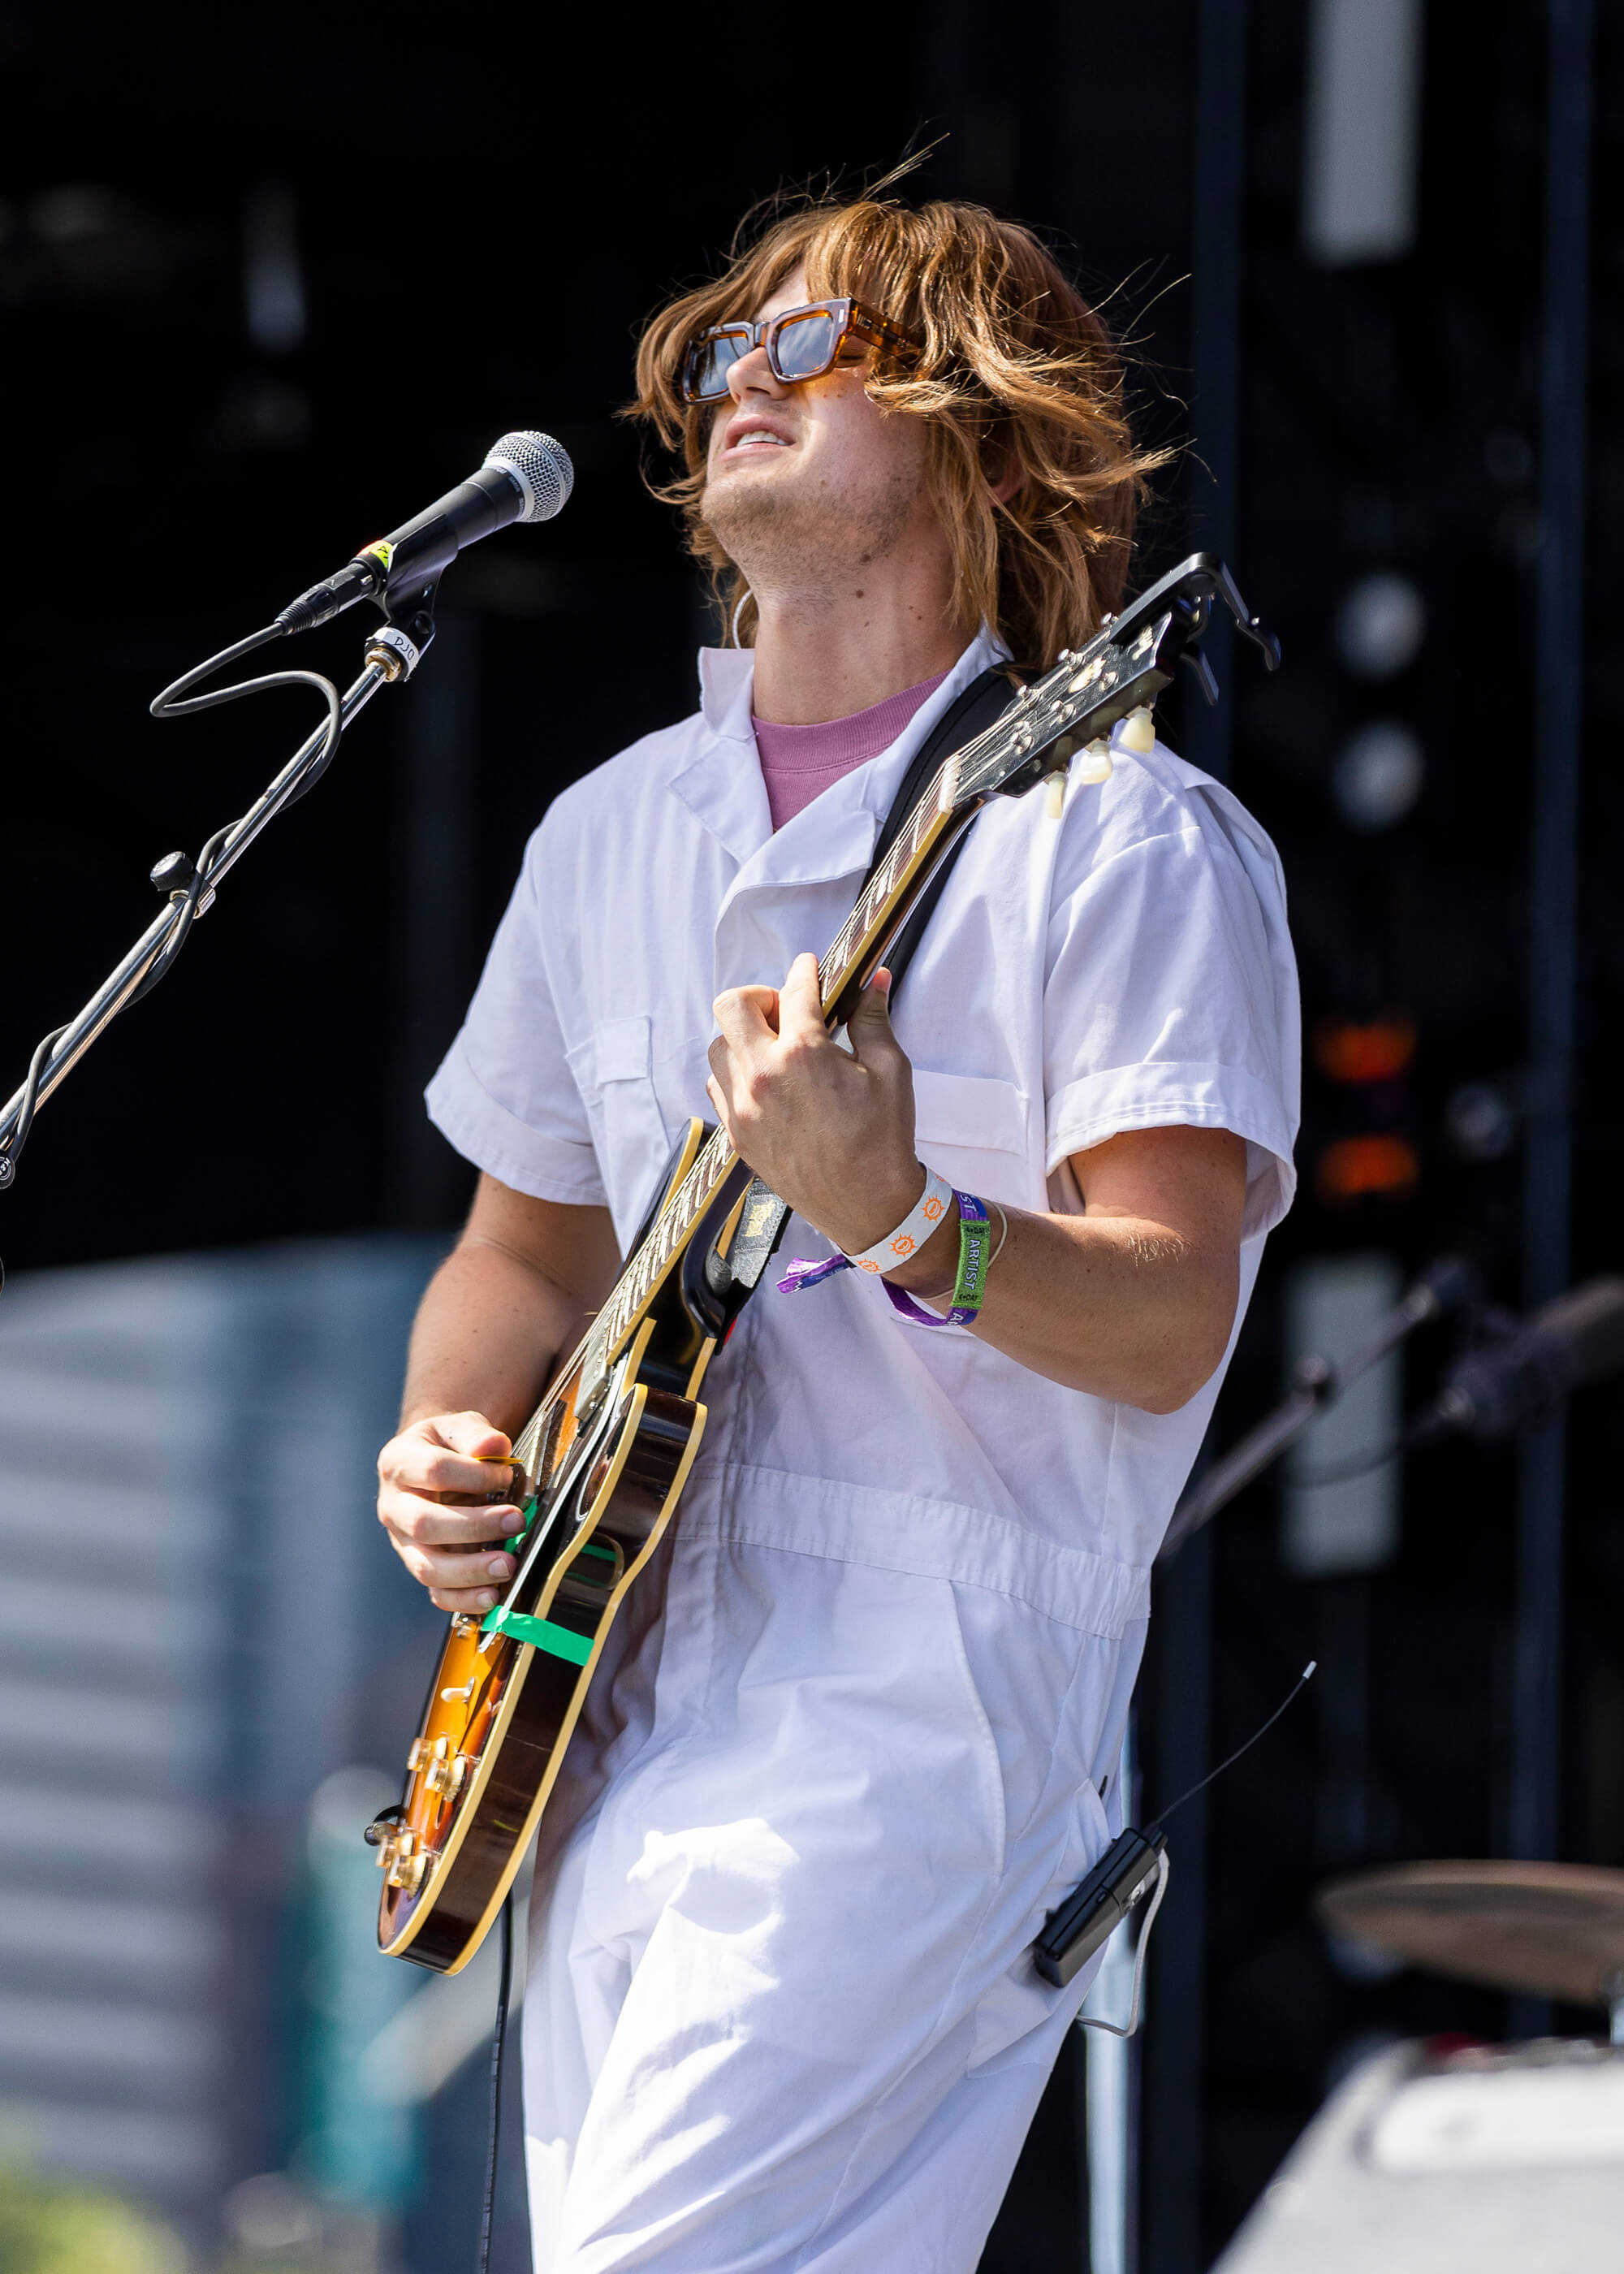 Joe Keery wearing all white and holding a guitar performing on stage